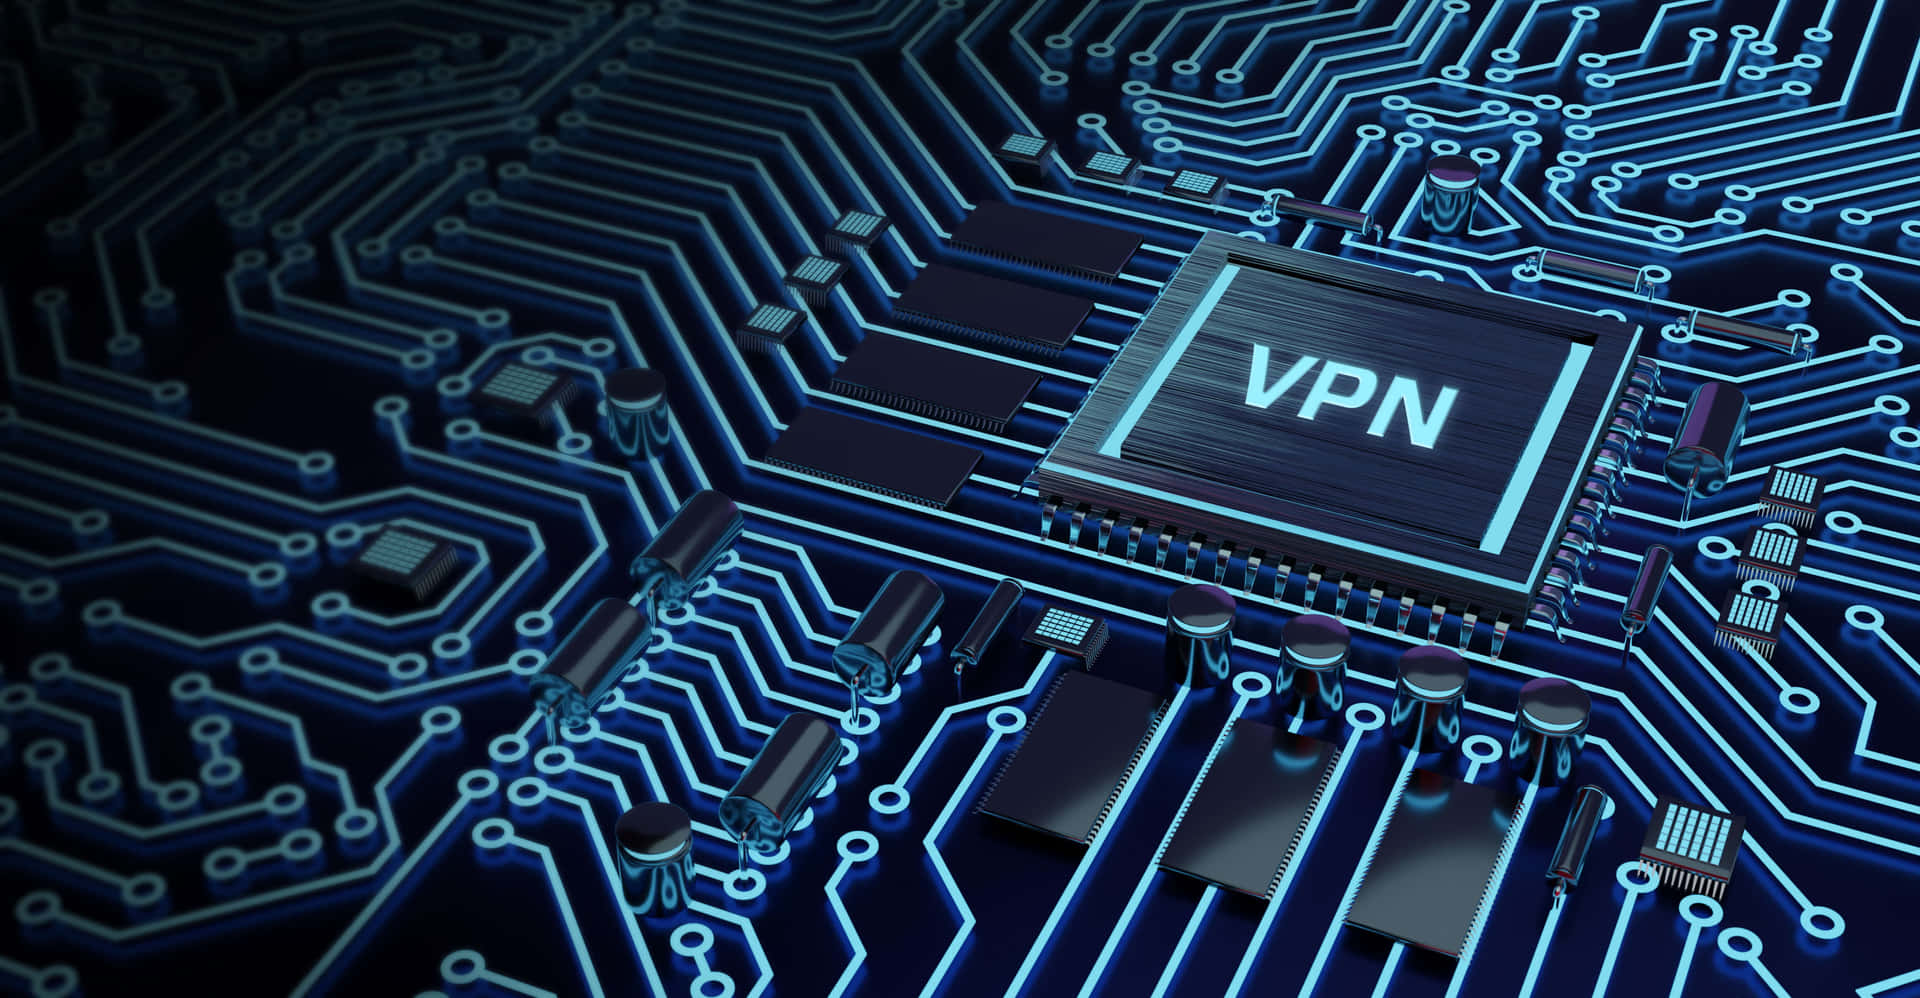 Vpn Chip And Blue Microelectronics Wallpaper